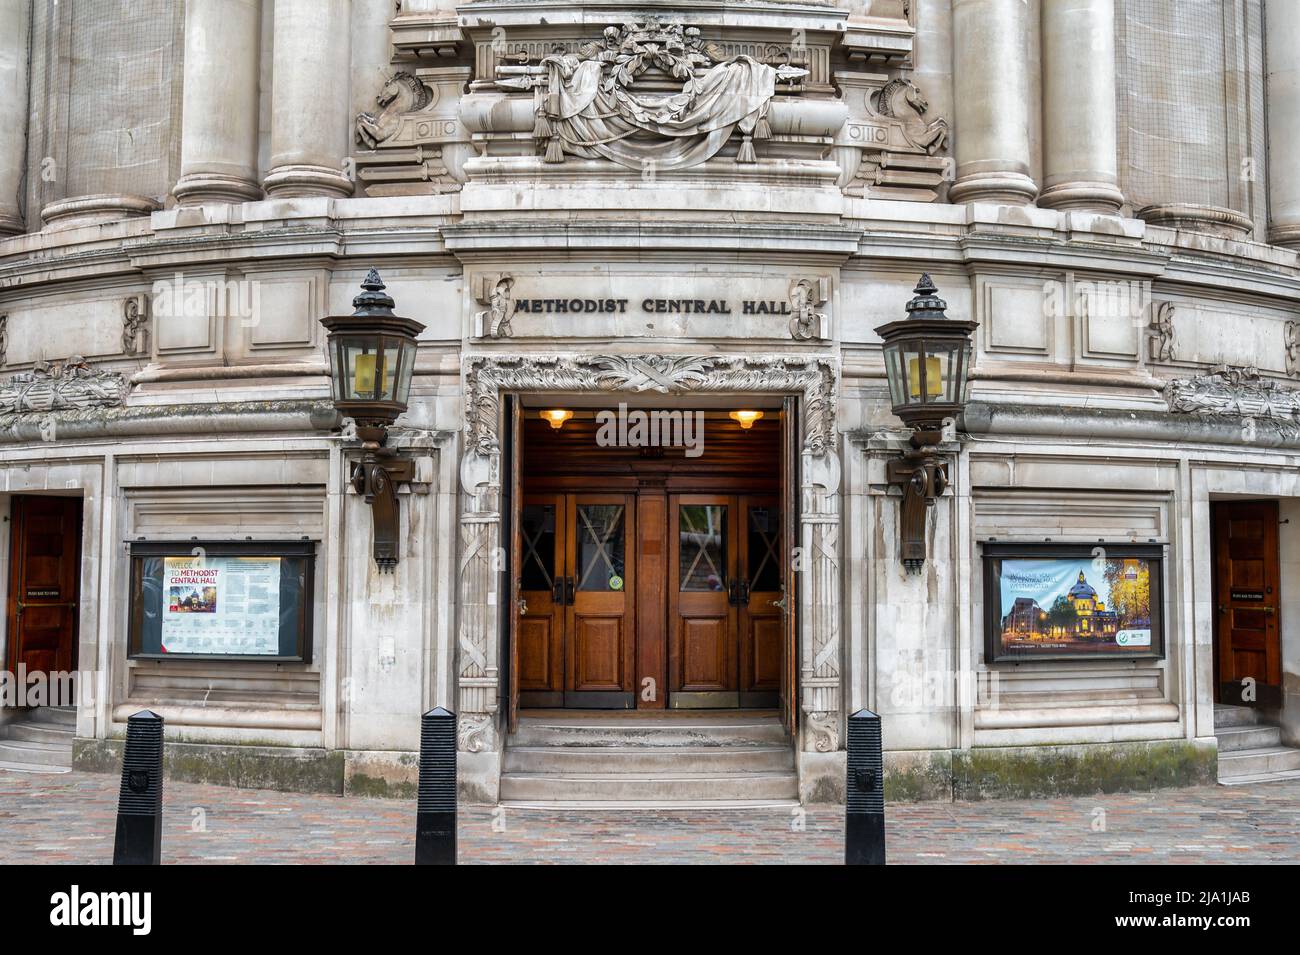 London, UK- May 3, 2022: The entrance for Methodist Central Hall Westminster in London Stock Photo